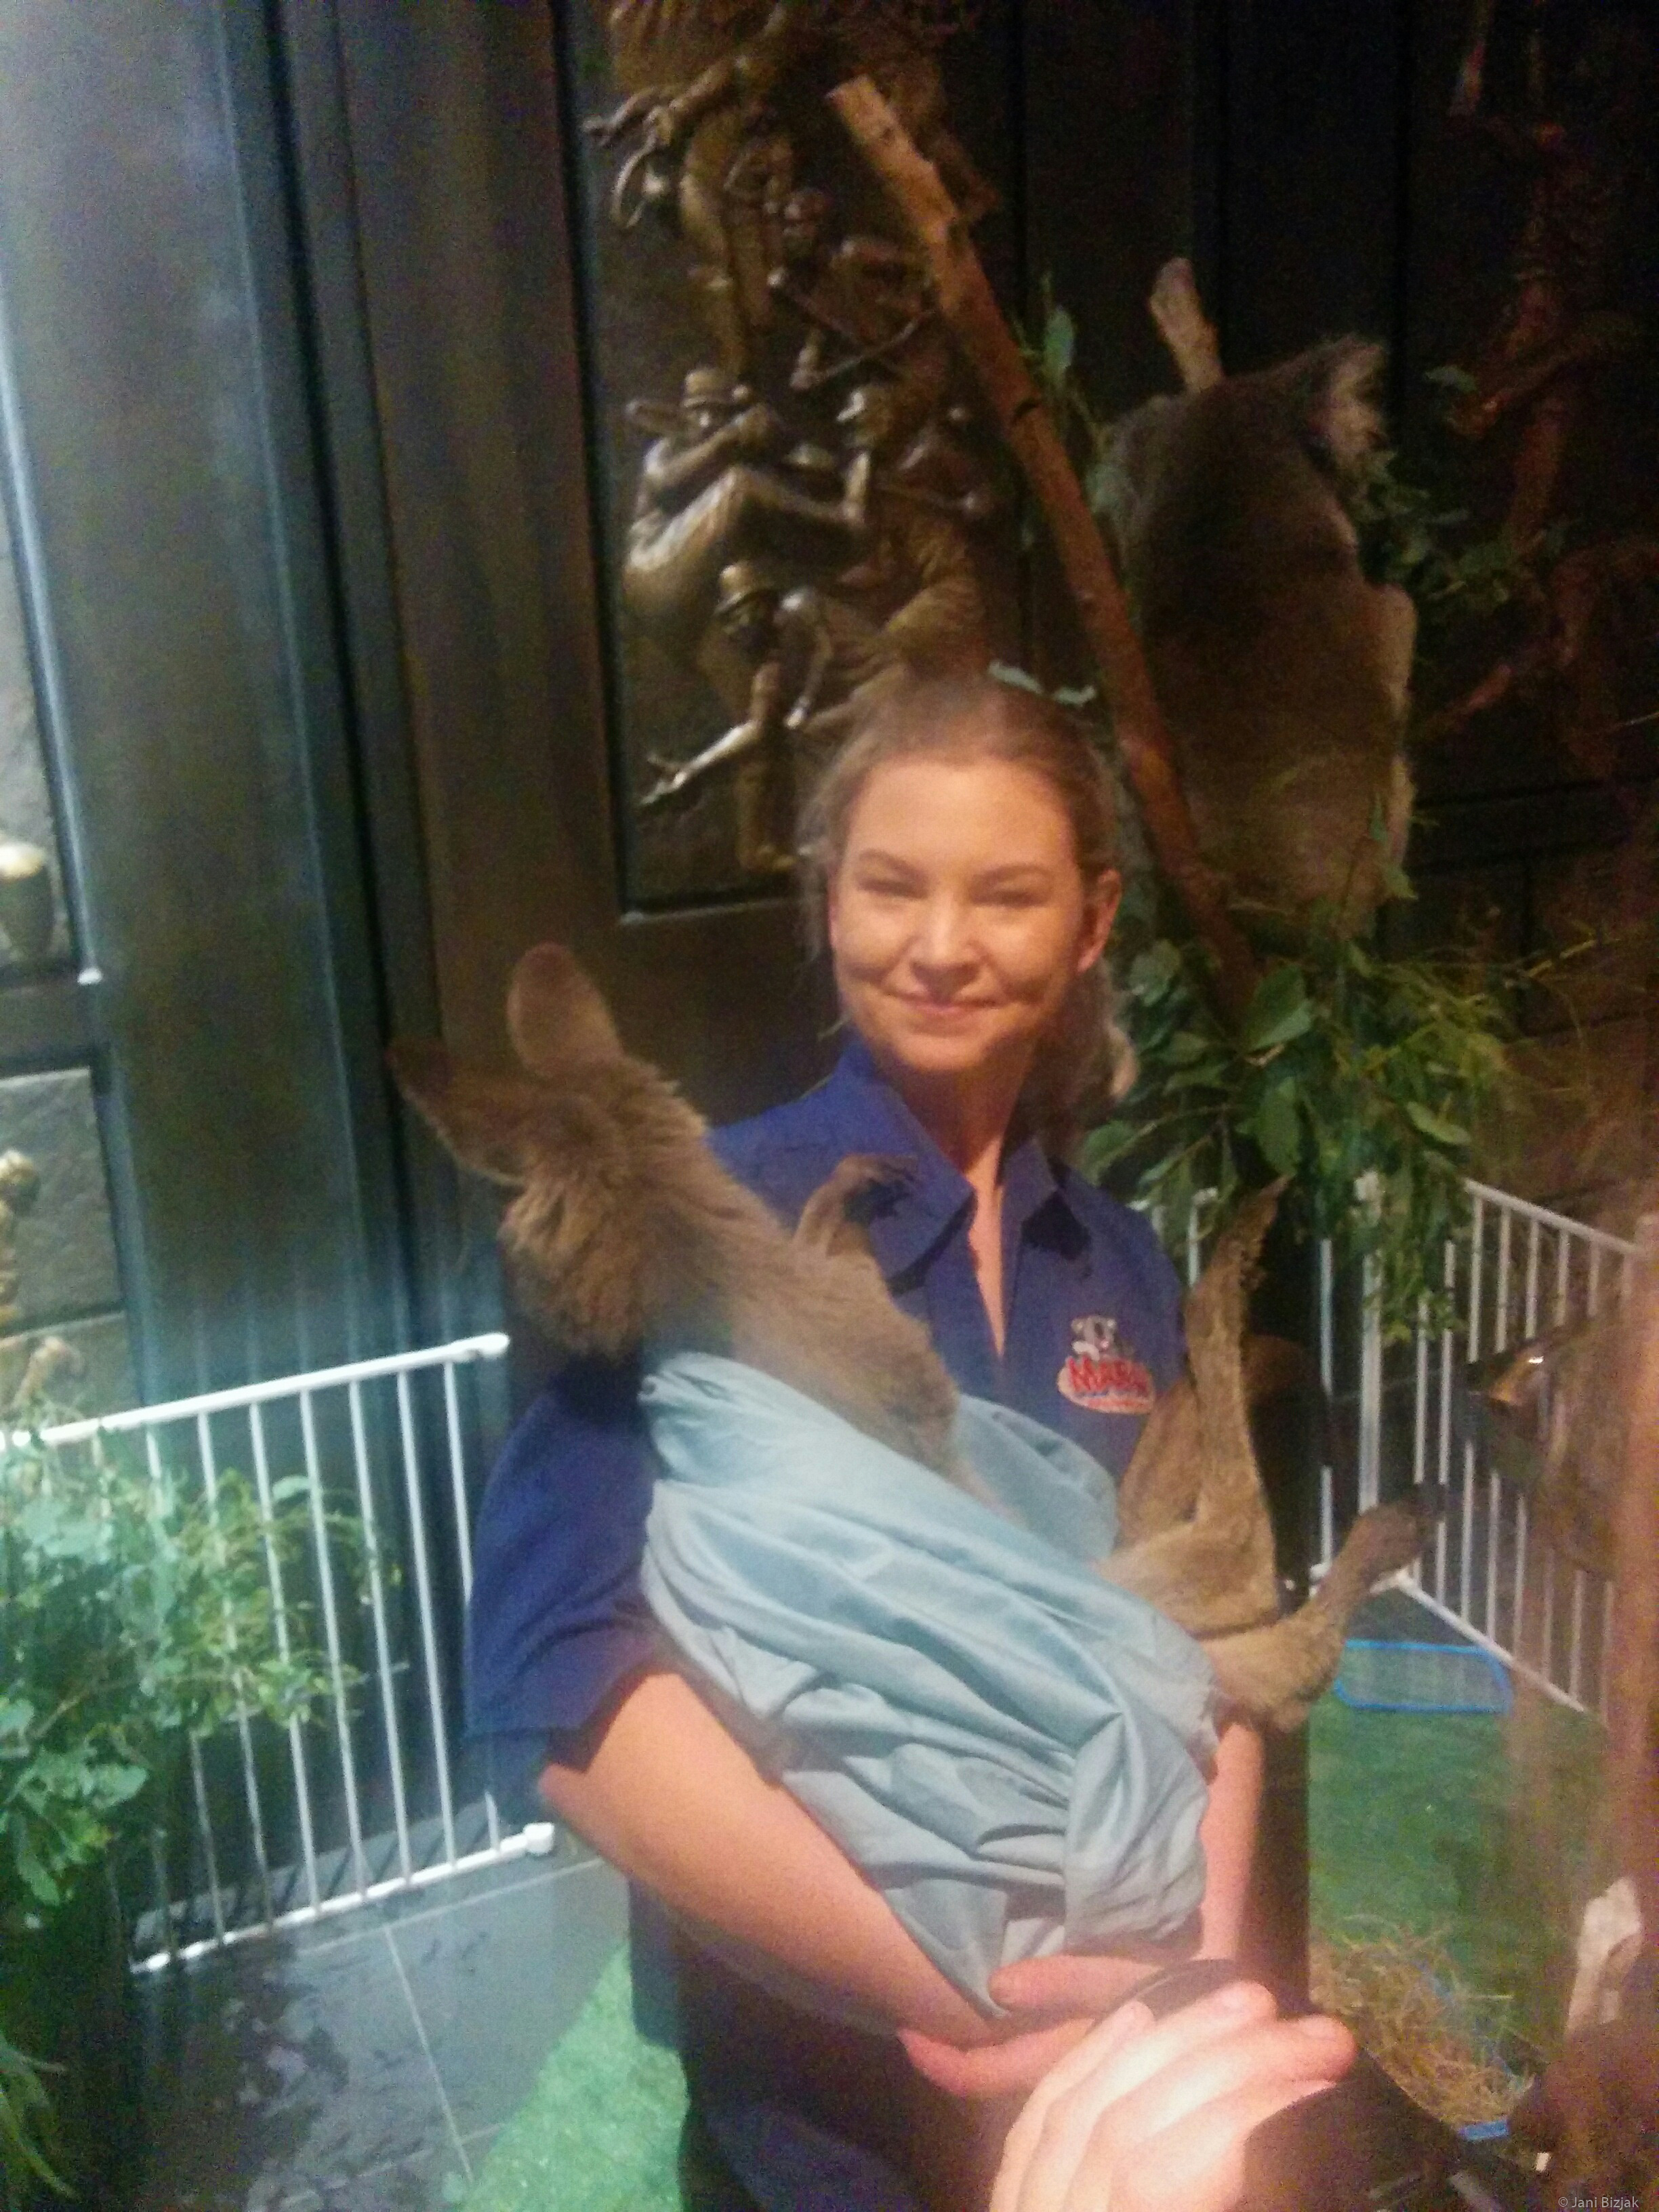 Kangaroo in pouch? :)